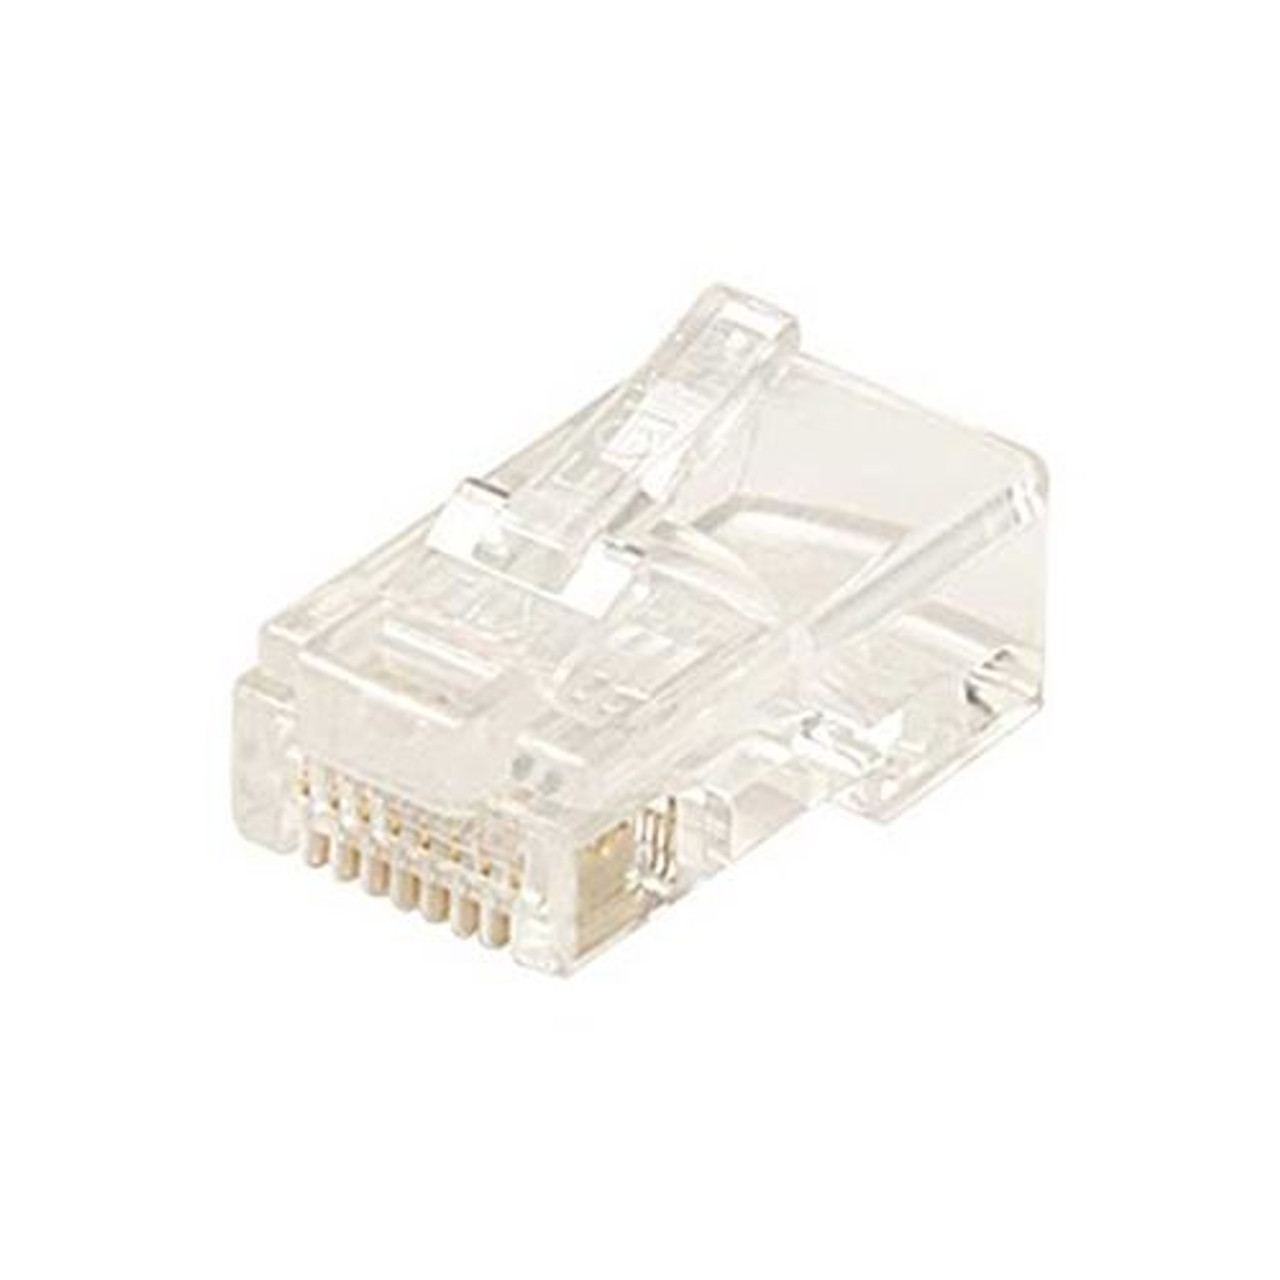 Eagle RJ45 Plug Connector 100 Pack Round Stranded 8 Pin 8X8 Modular Gold Plate 24-26 AWG 6 Micron 8P8C Male Modular Network Data Telephone Line Plugs